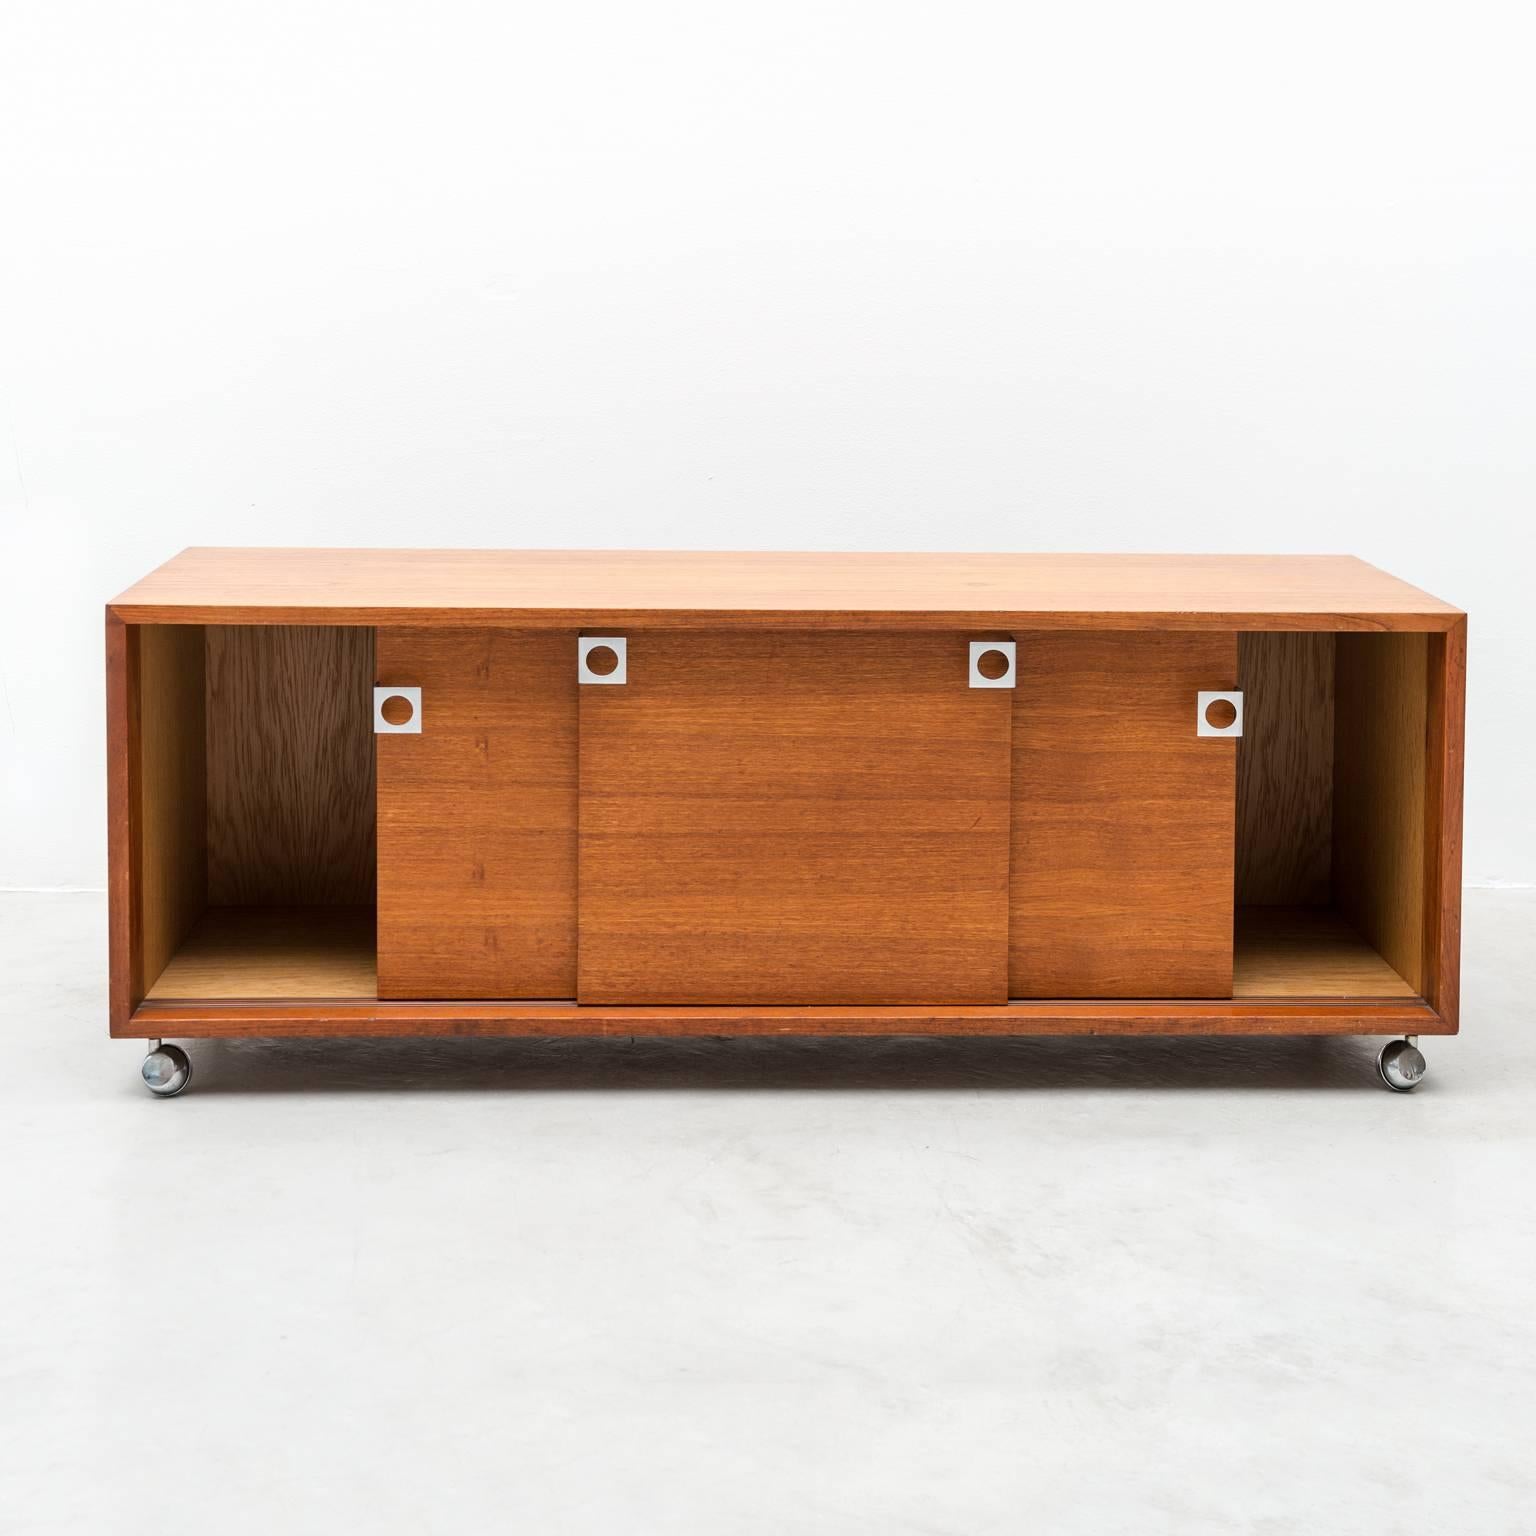 Handsome small credenza in teak with stainless steel pulls and castors by Bodil Kjaer for E. Pedersen & Son. In fine original condition, Denmark, 1960s.